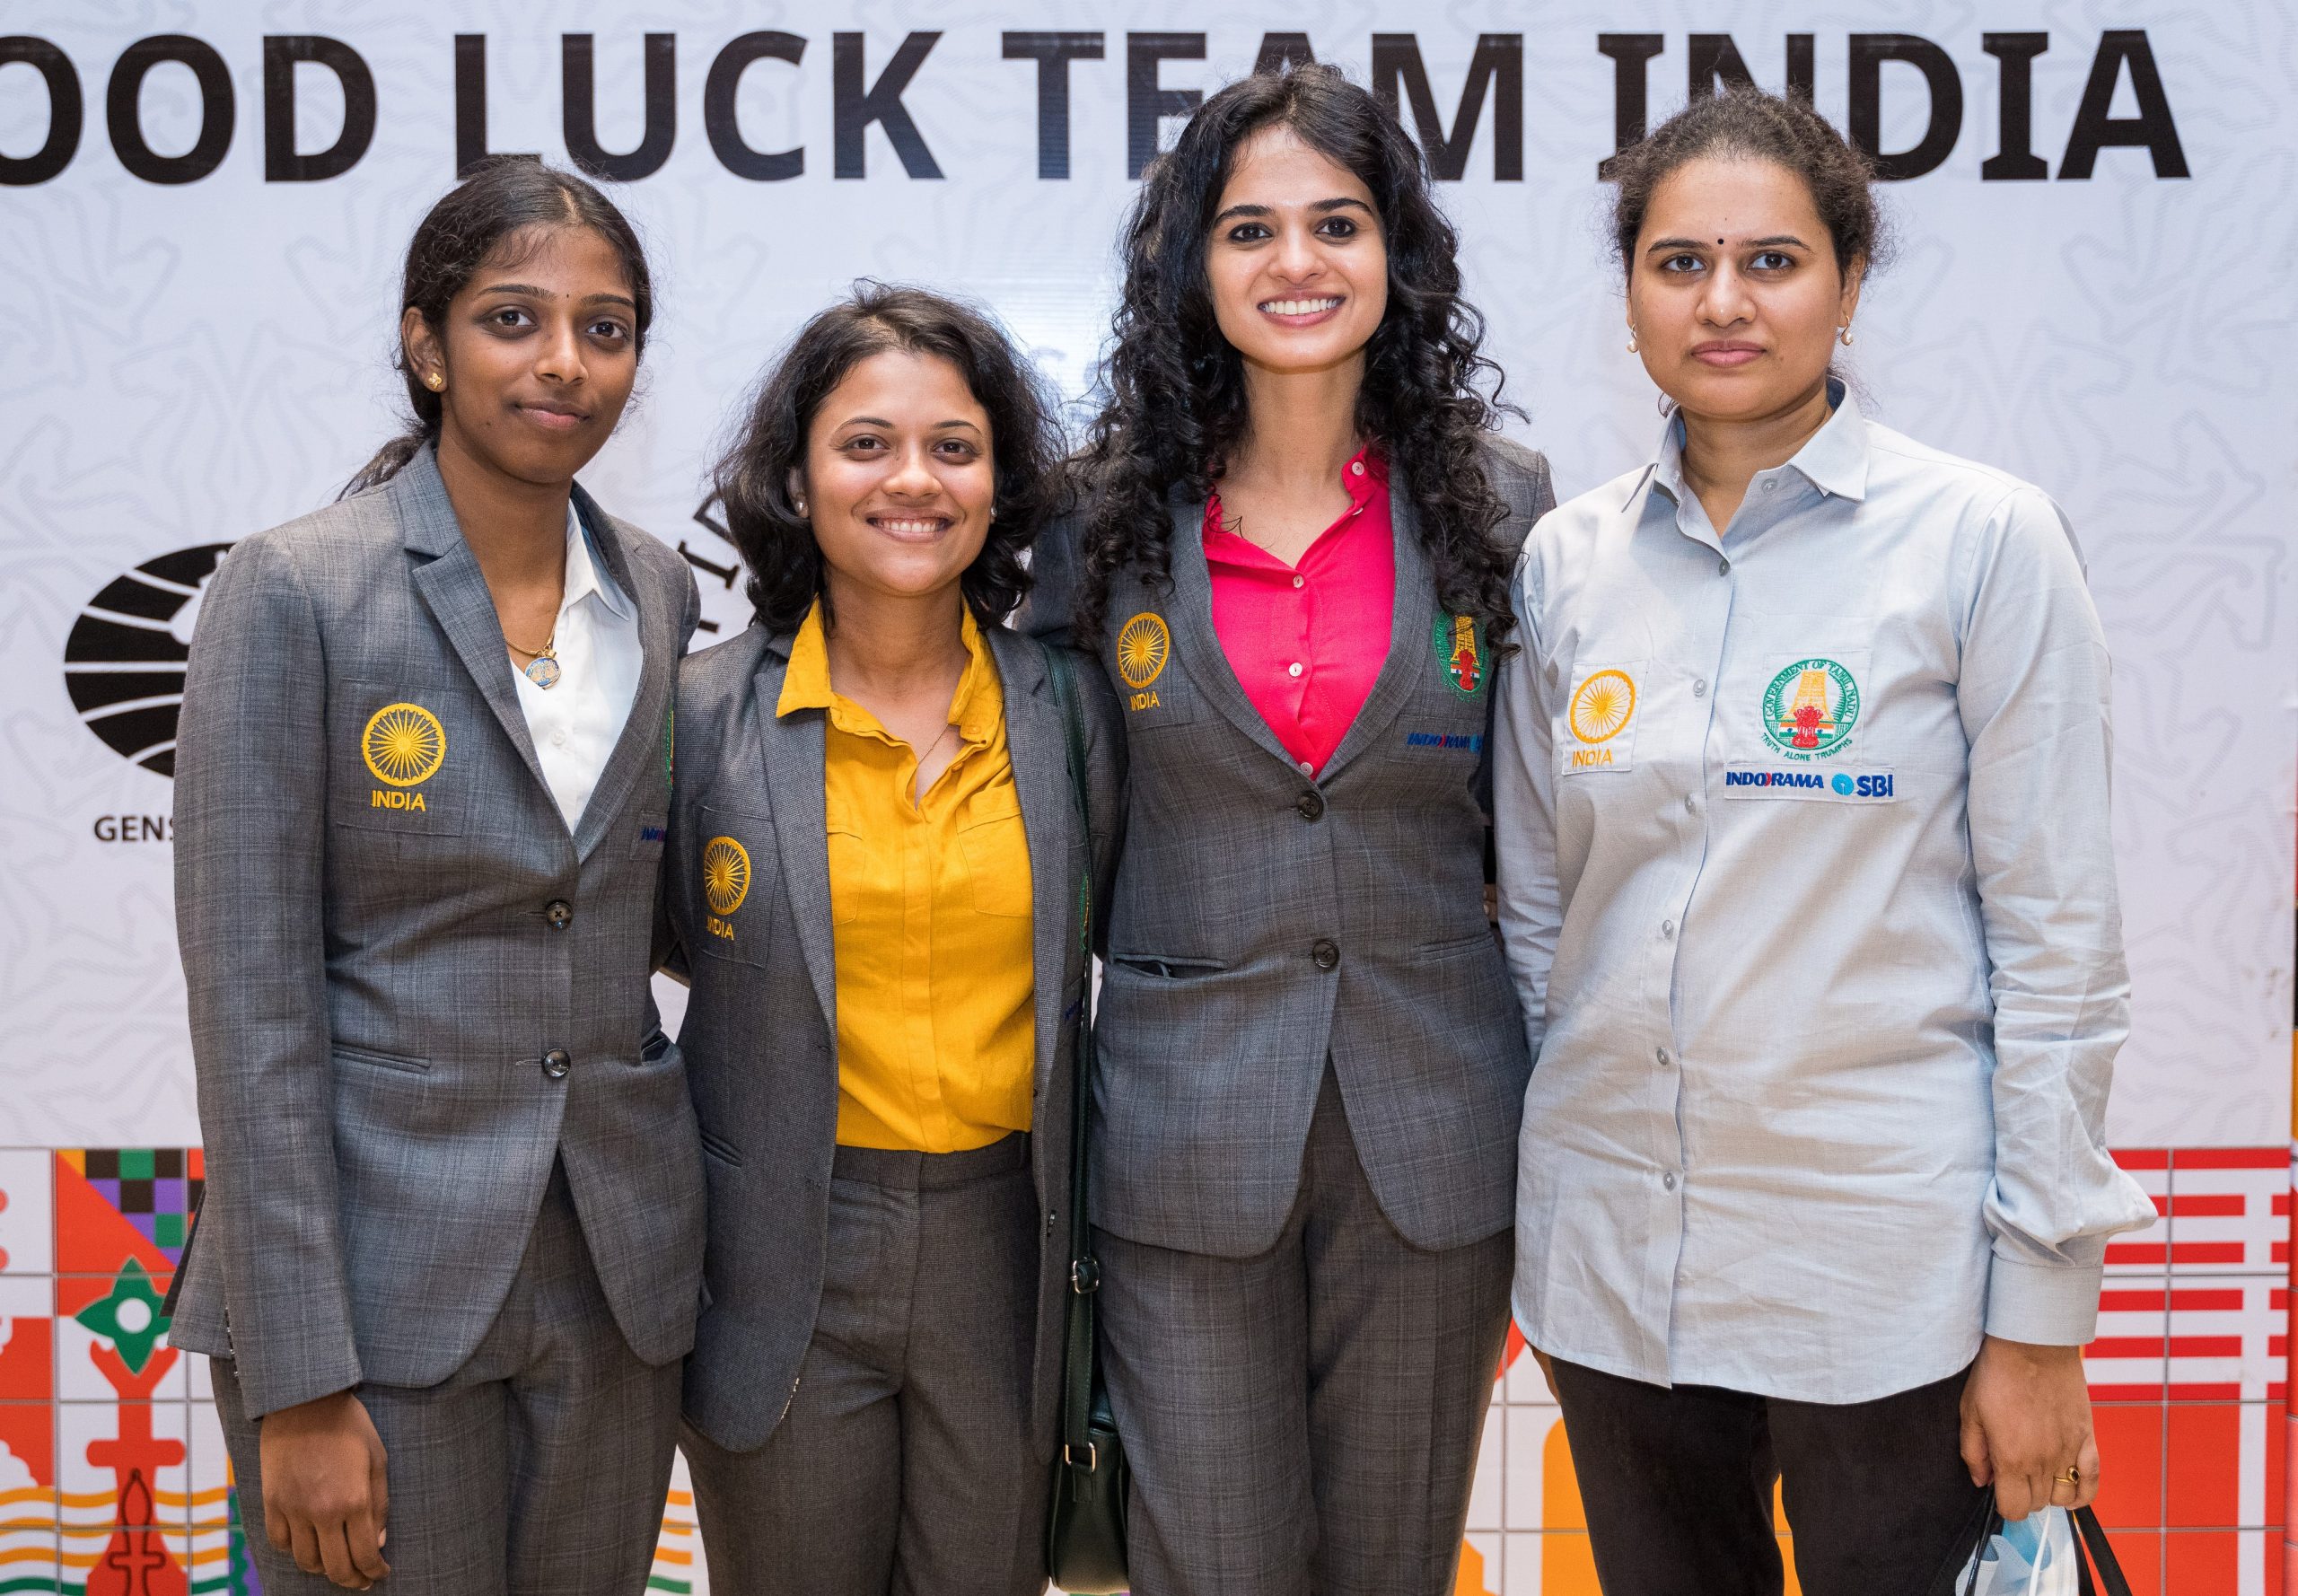 players-of-bronze-medal-winning-indian-womens-a-team-at-the-44th-chess-olympiad-photo-credit-stev-bonhage-scaled.jpg